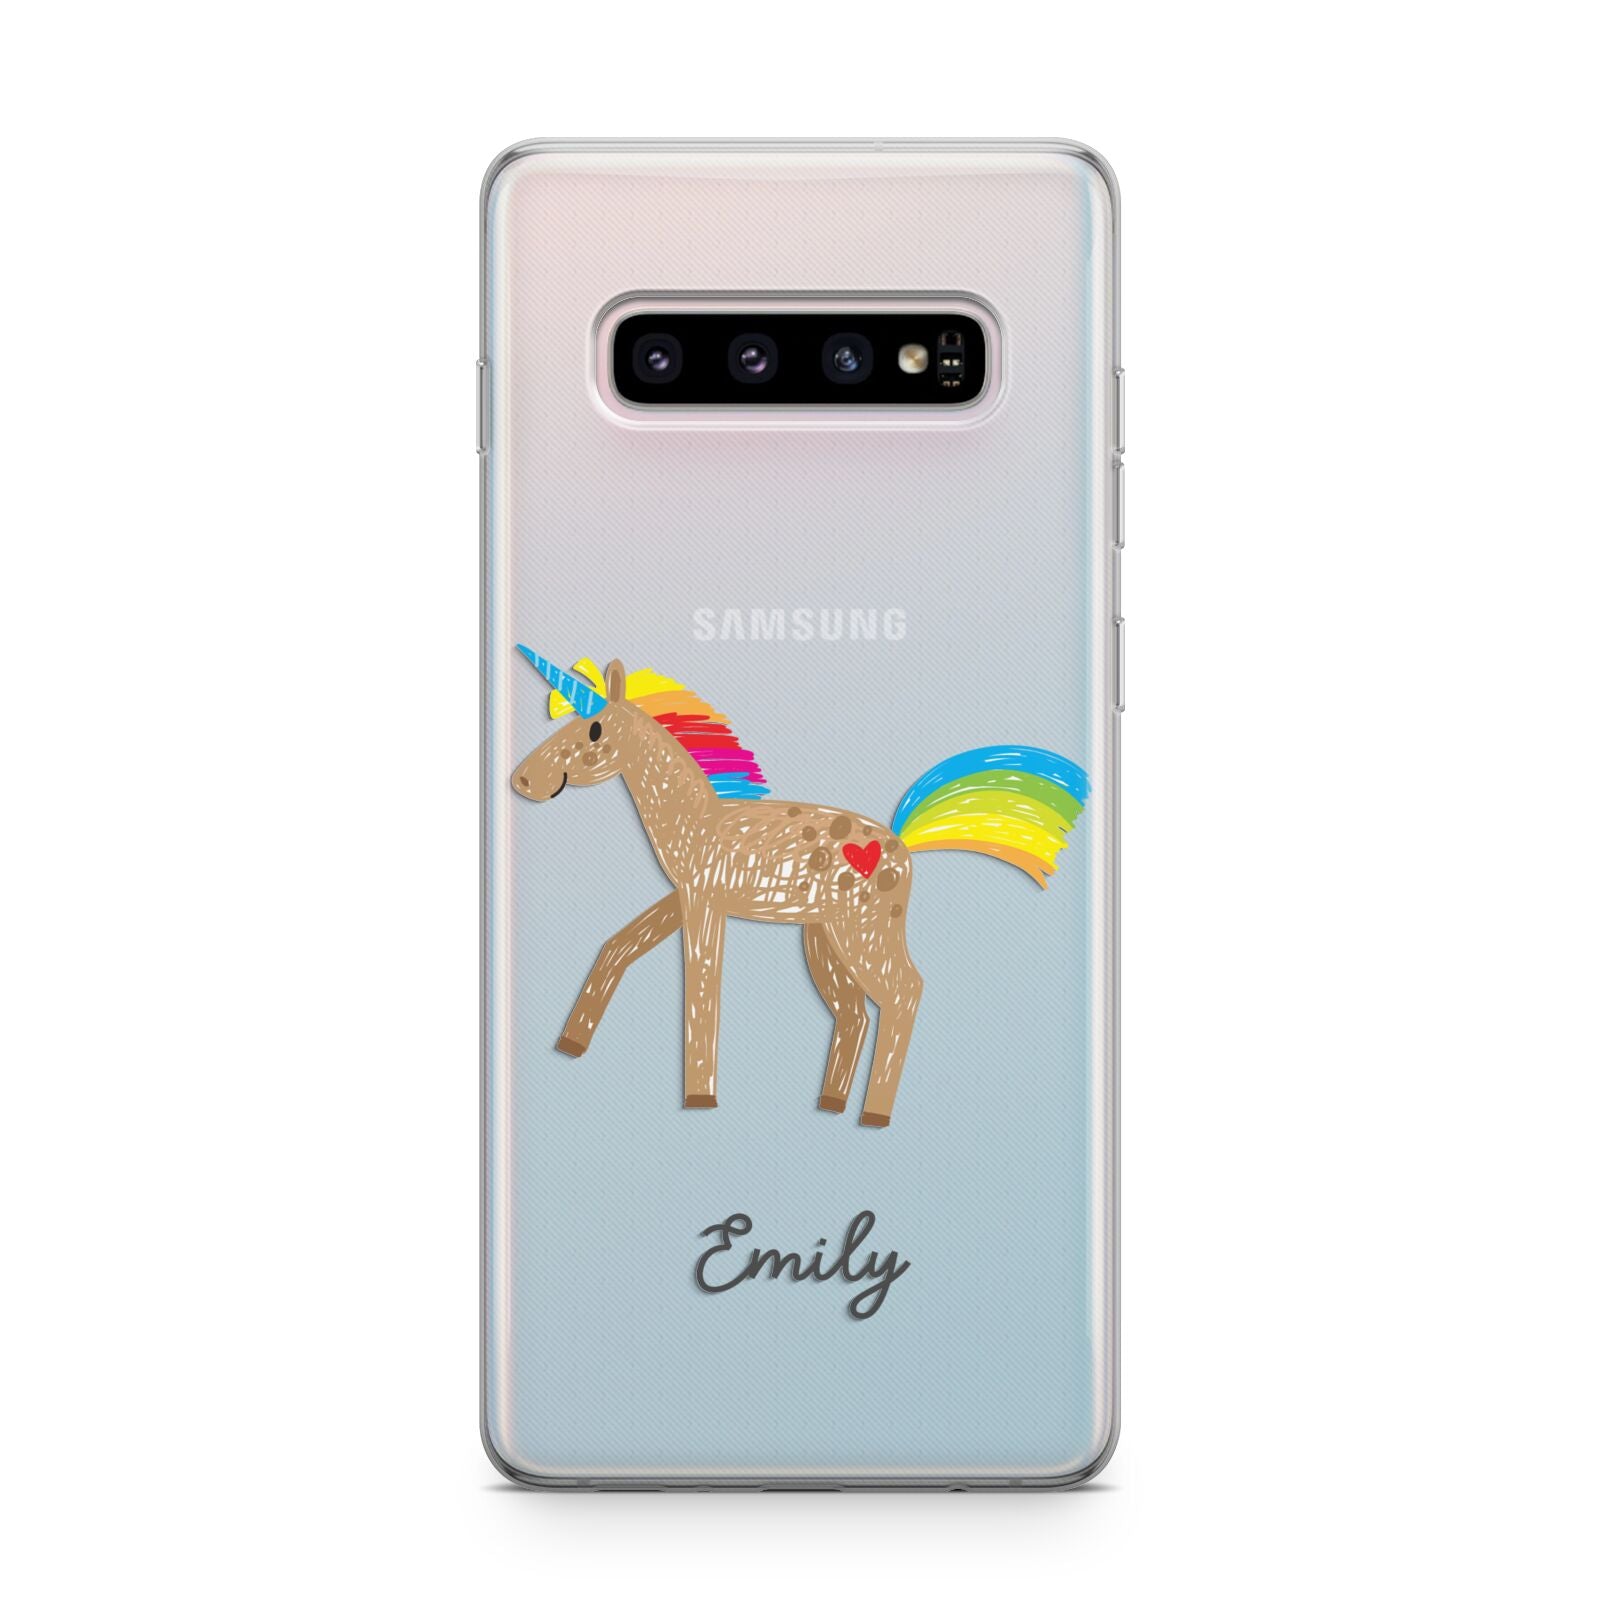 Personalised Unicorn with Name Samsung Galaxy S10 Plus Case